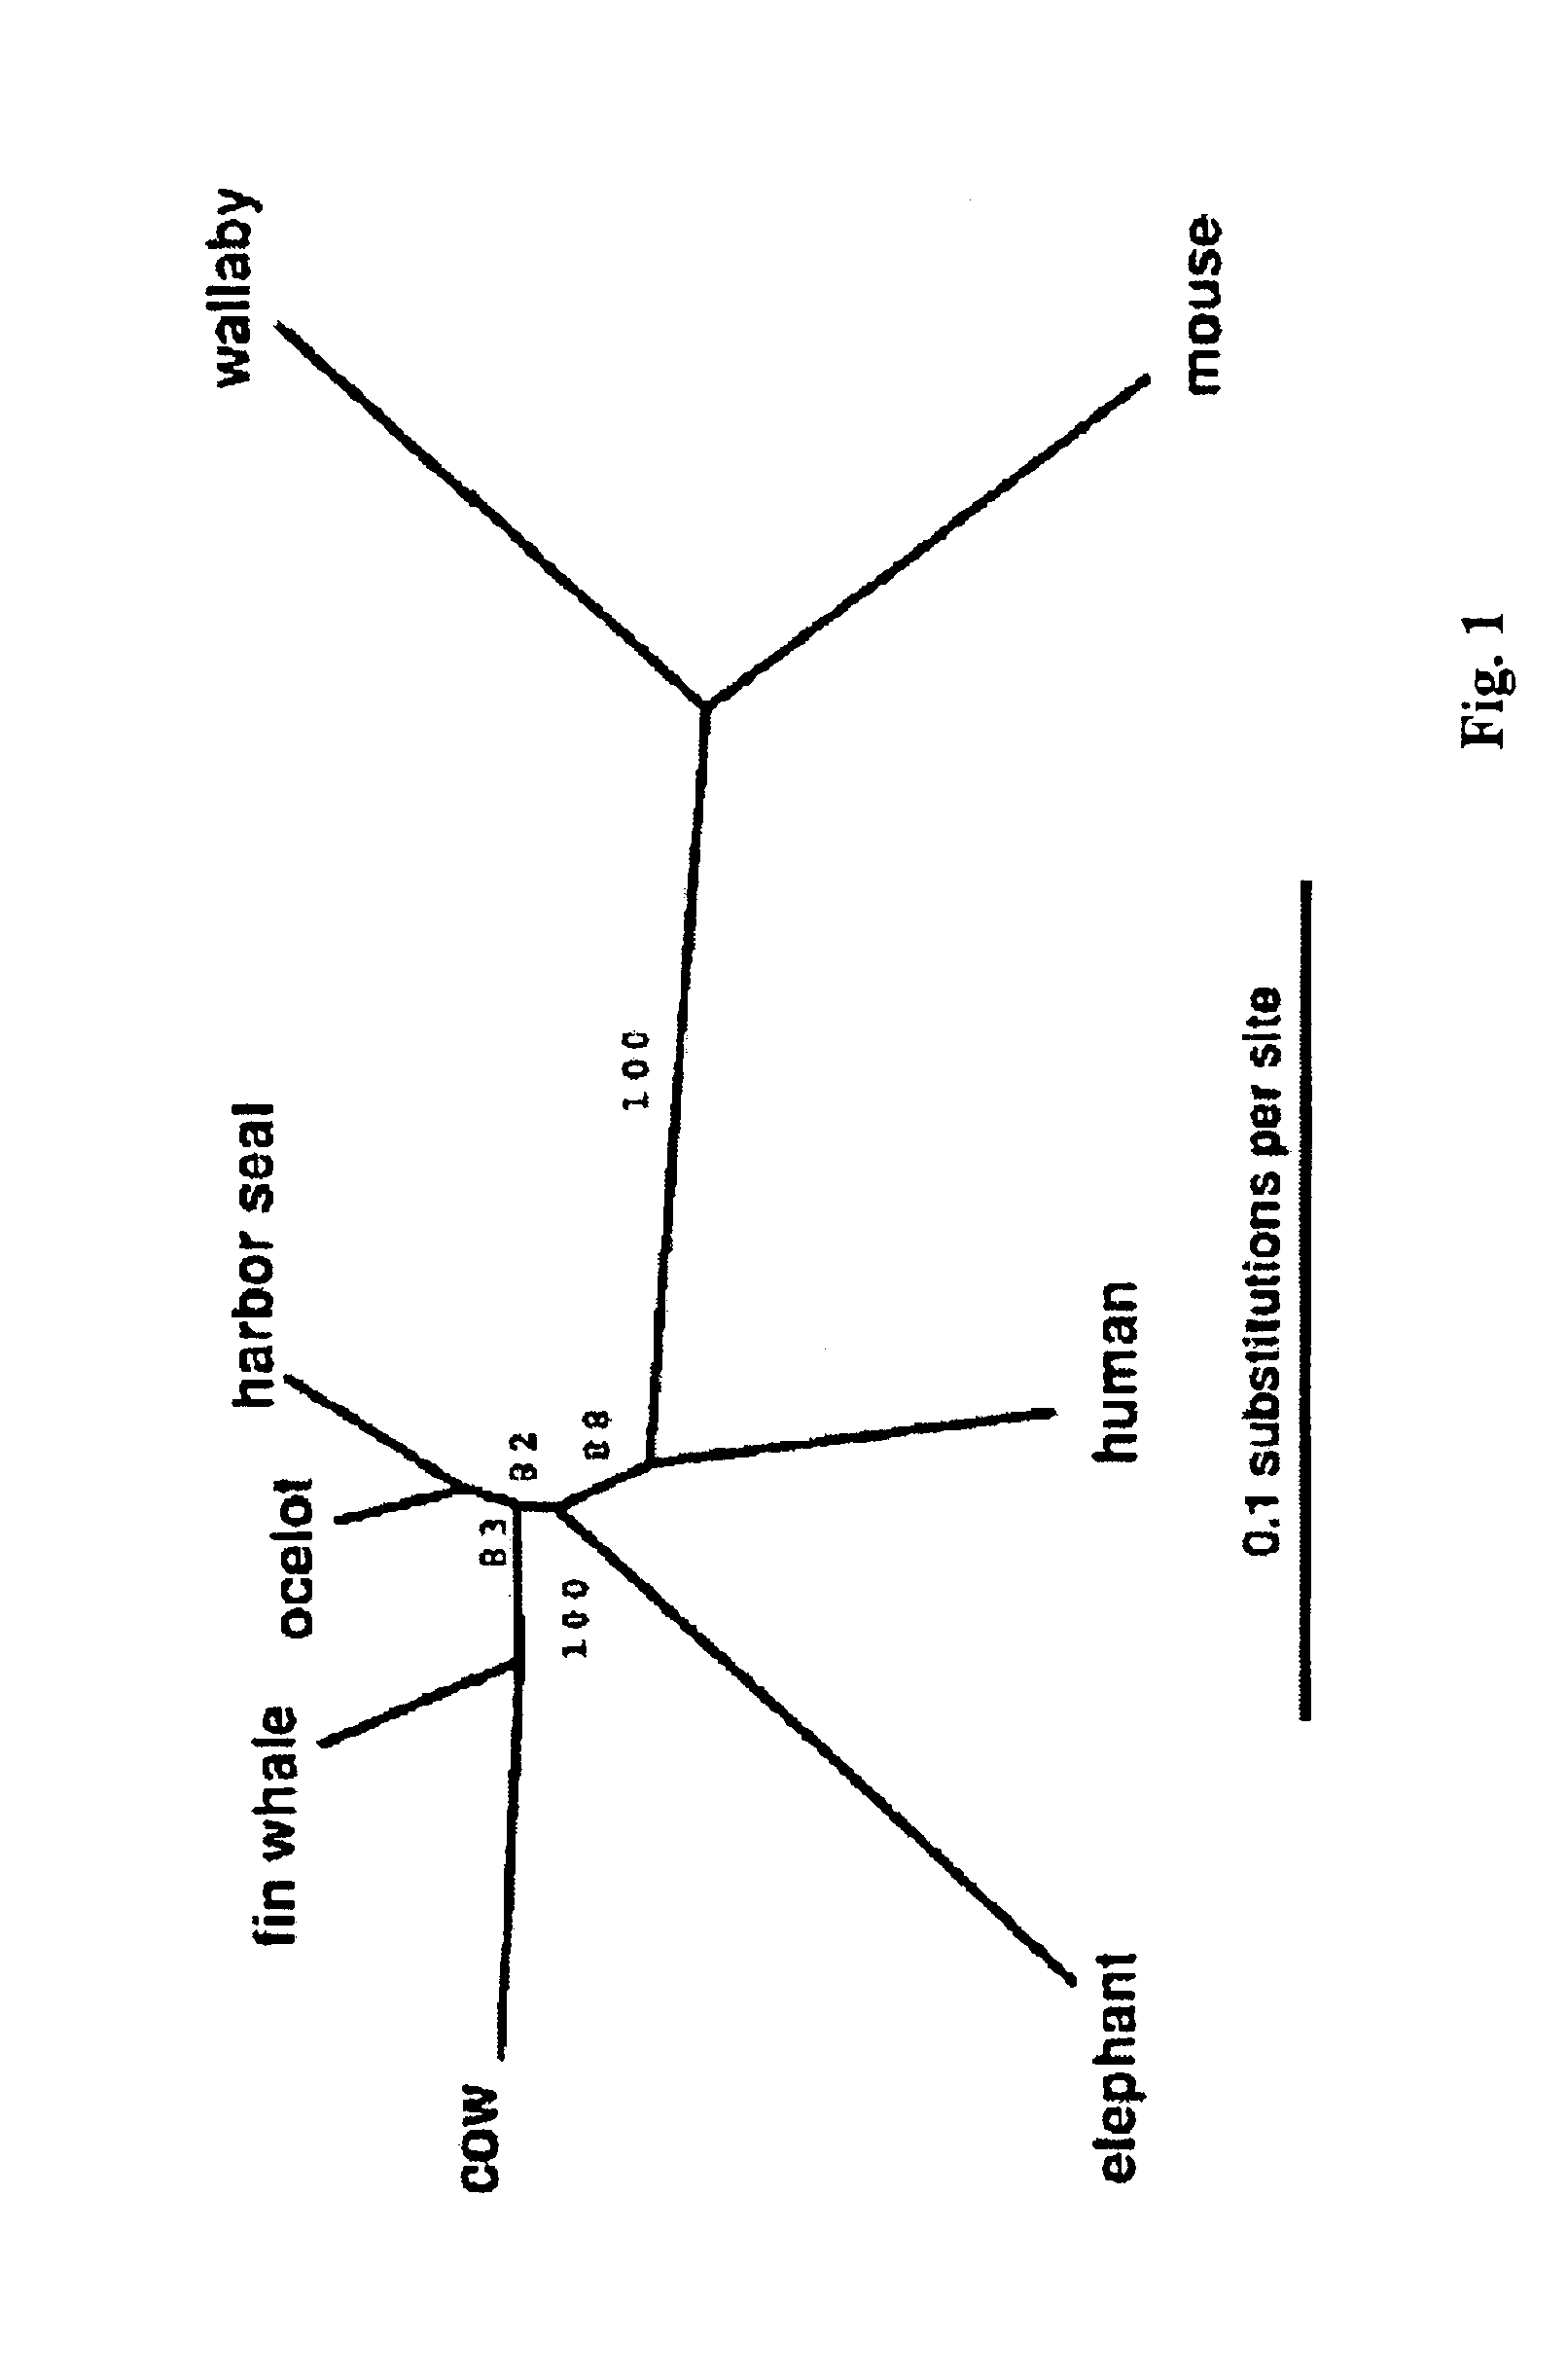 Efficient cis-element discovery method using multiple sequence comparisons based on evolutionary relationships